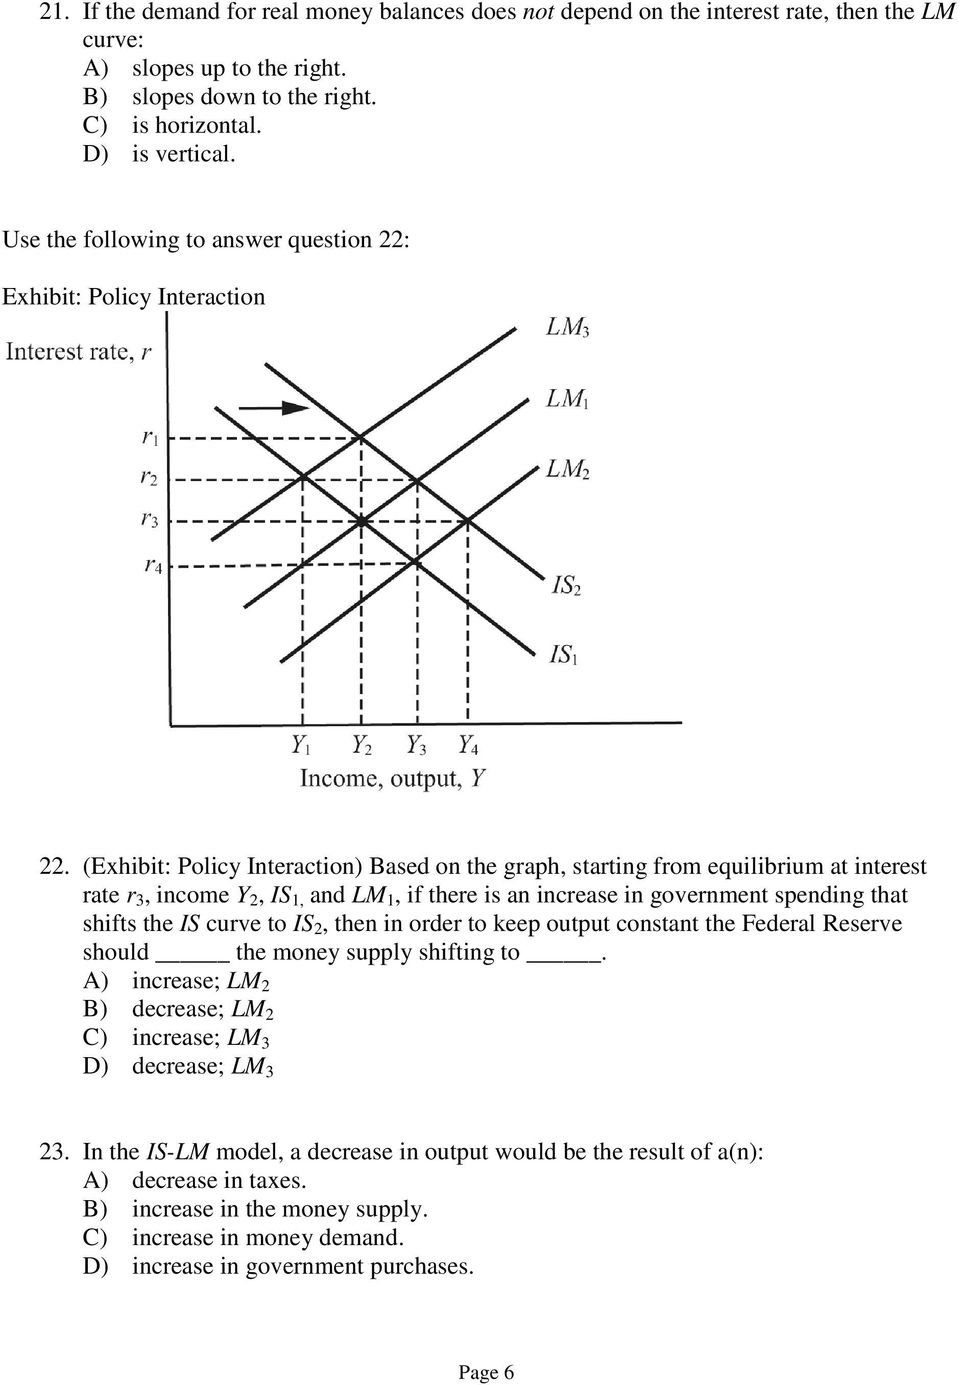 (Exhibit: Policy Interaction) Based on the graph, starting from equilibrium at interest rate r 3, income Y 2, IS 1, and LM 1, if there is an increase in government spending that shifts the IS curve